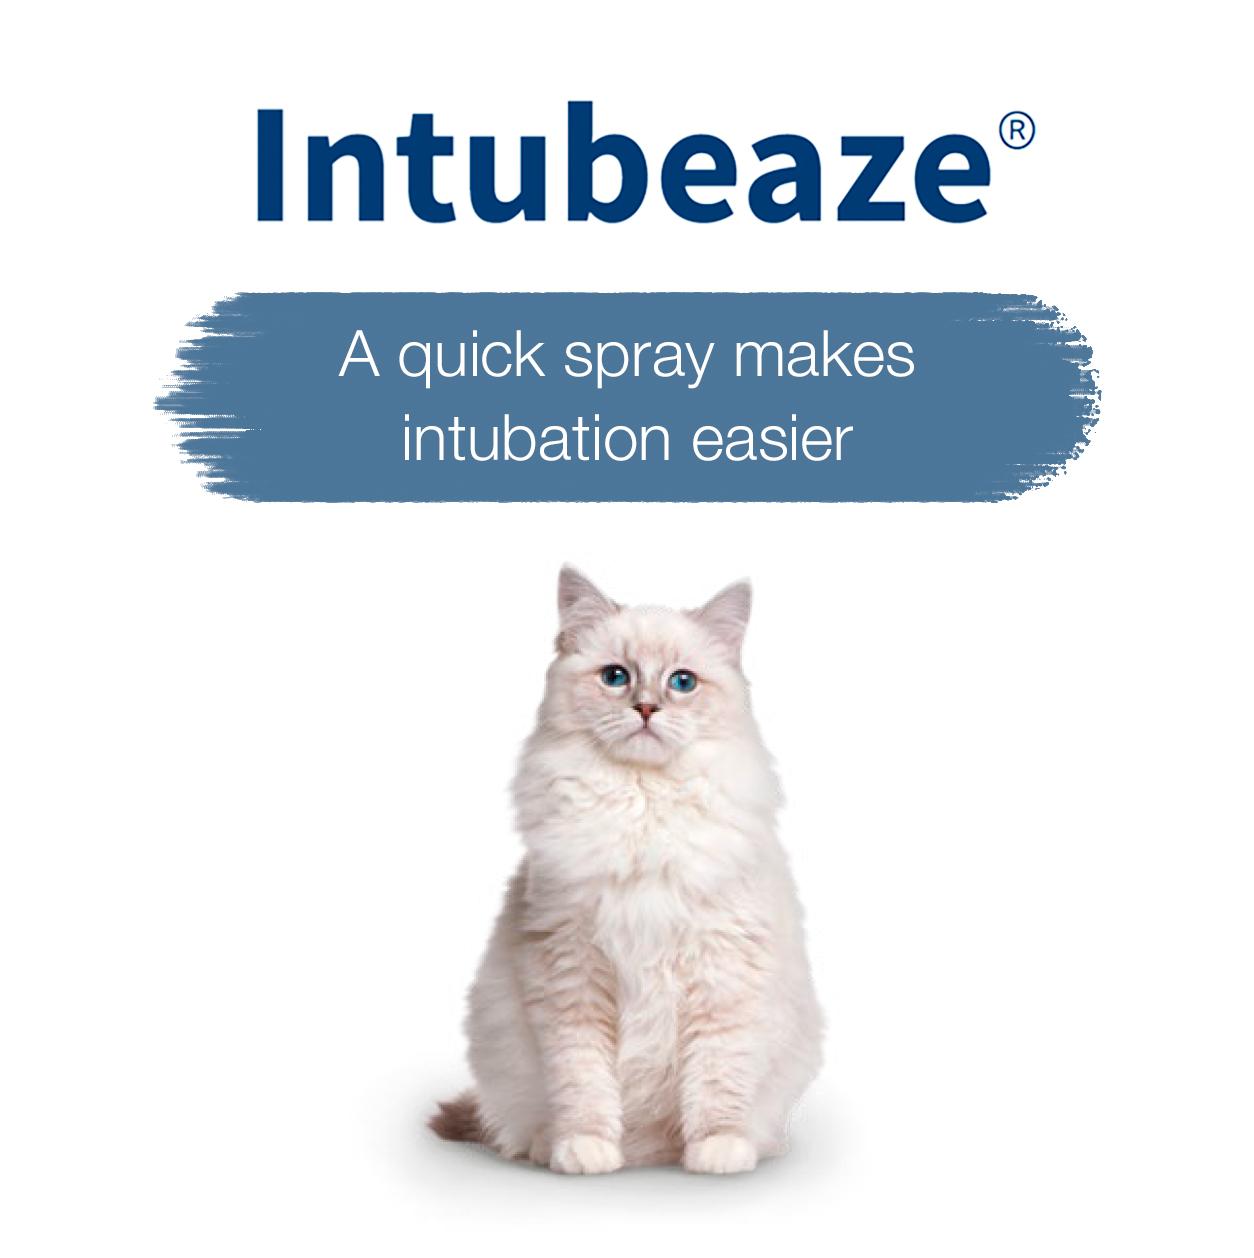 Log-in to learn more about Intubeaze